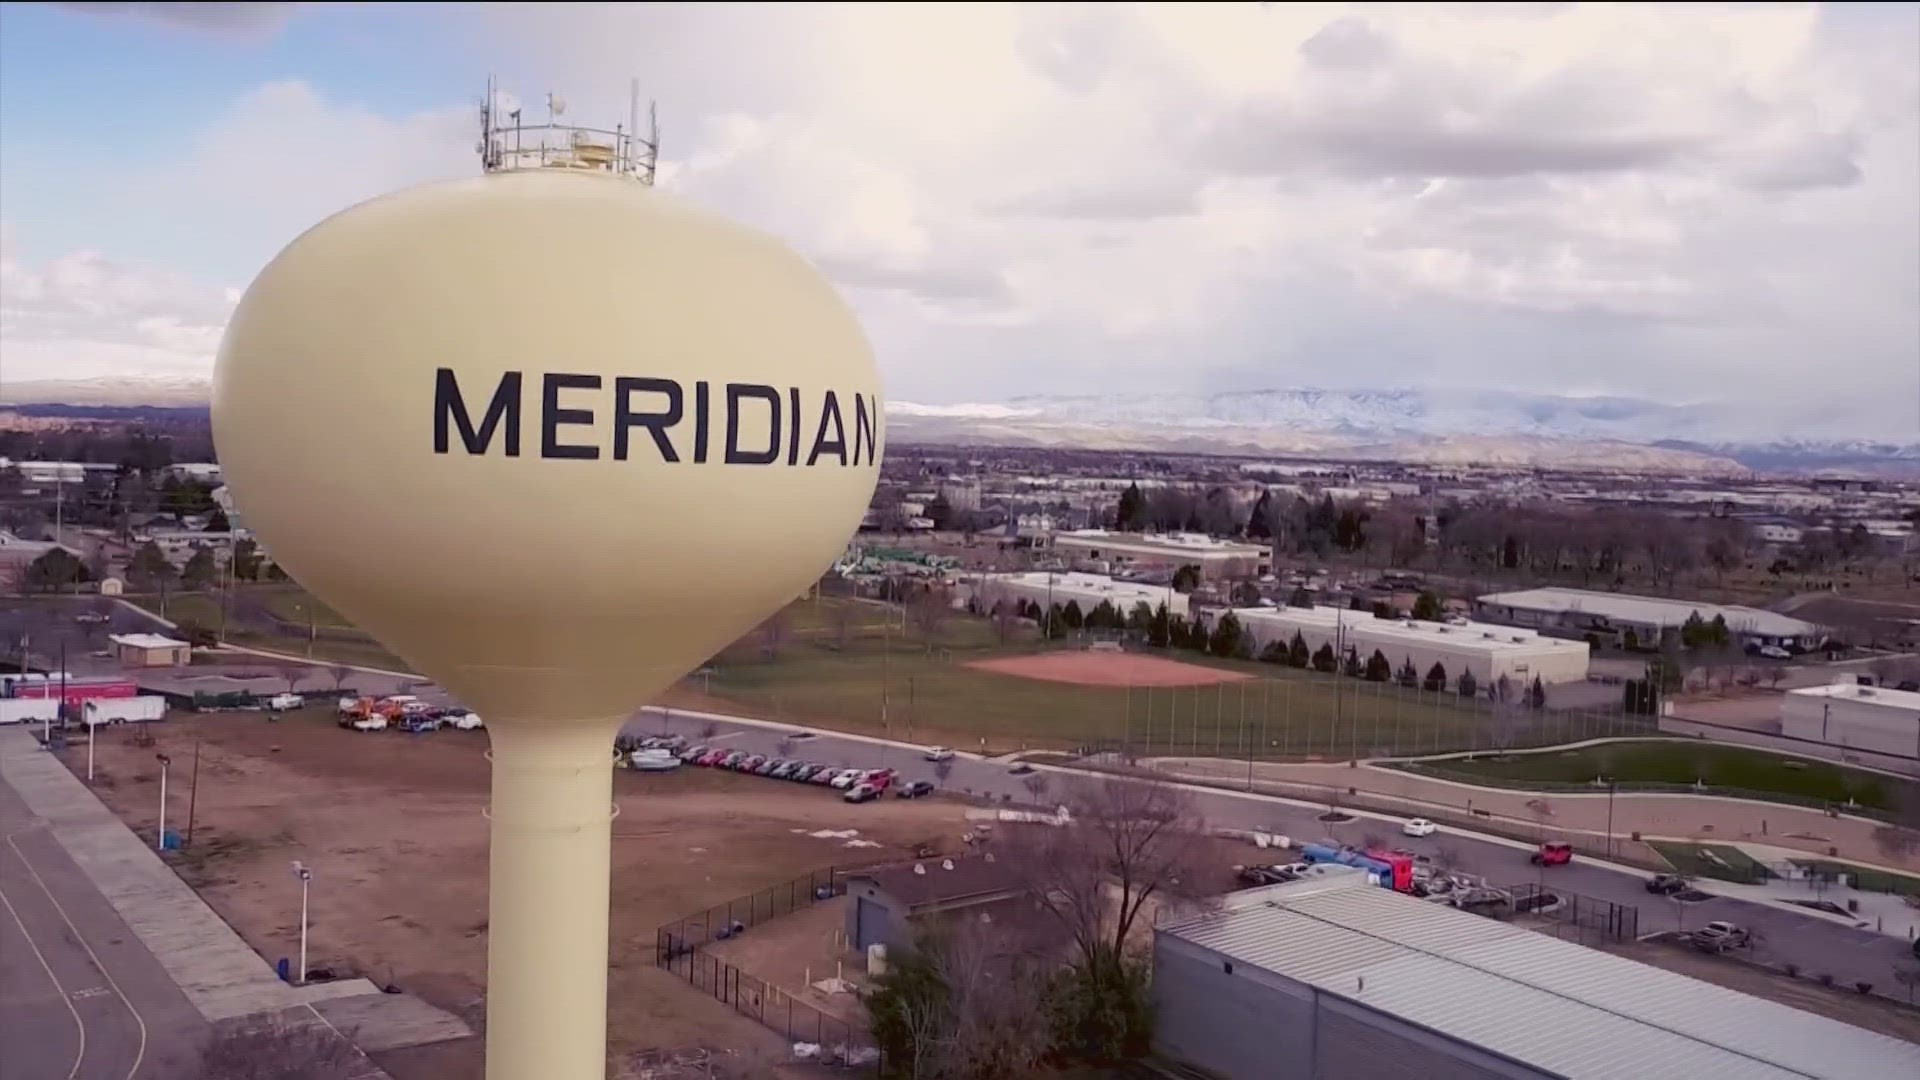 Meridian has been one of the fastest-growing cities in the country for years. Its population spiked by 56% from the 2010 Census to the 2020 Census.